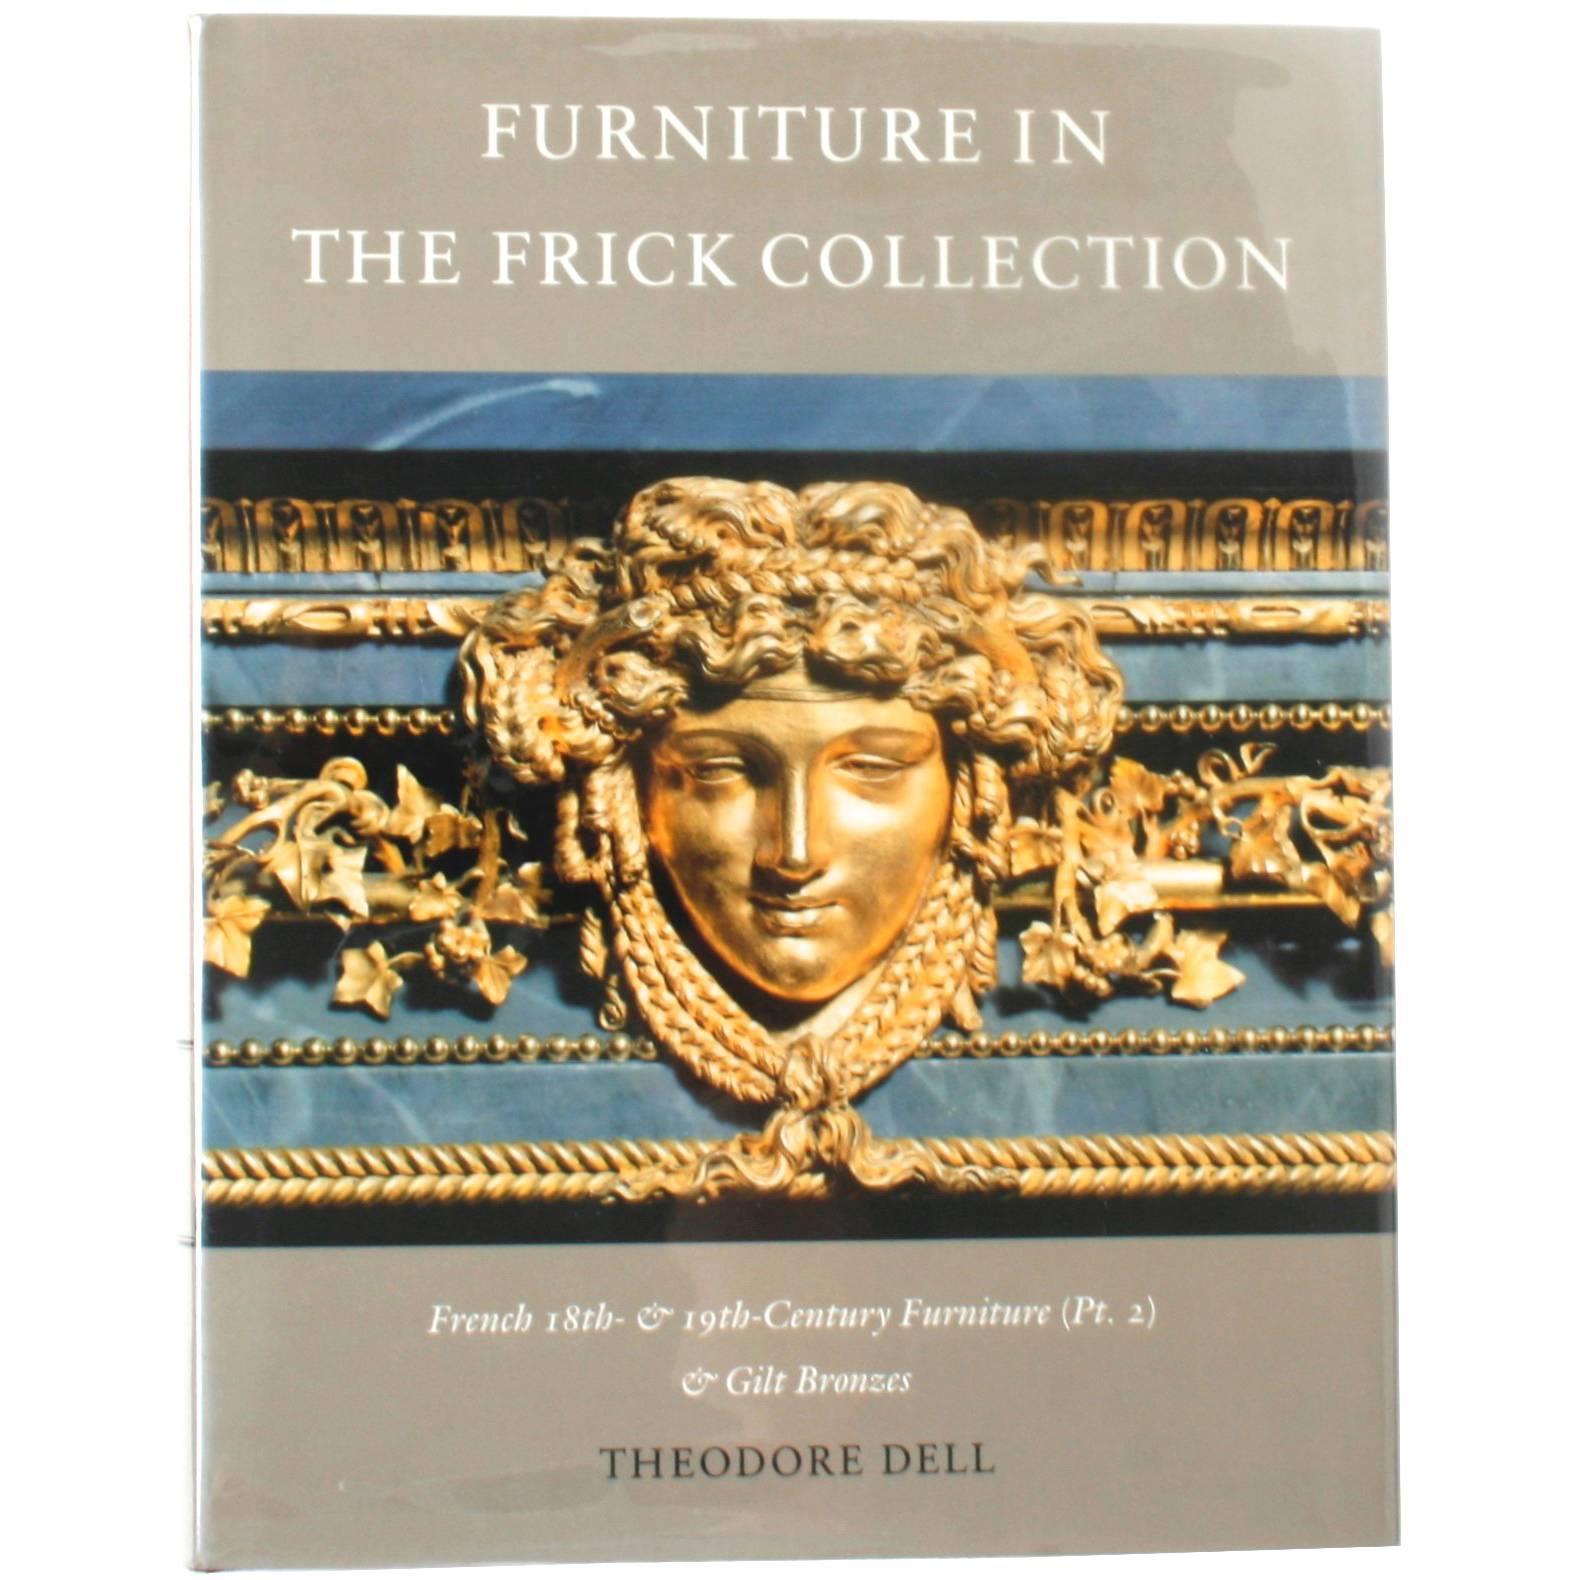 Furniture in The Frick Collection by Theodore Dell, 1st Edition